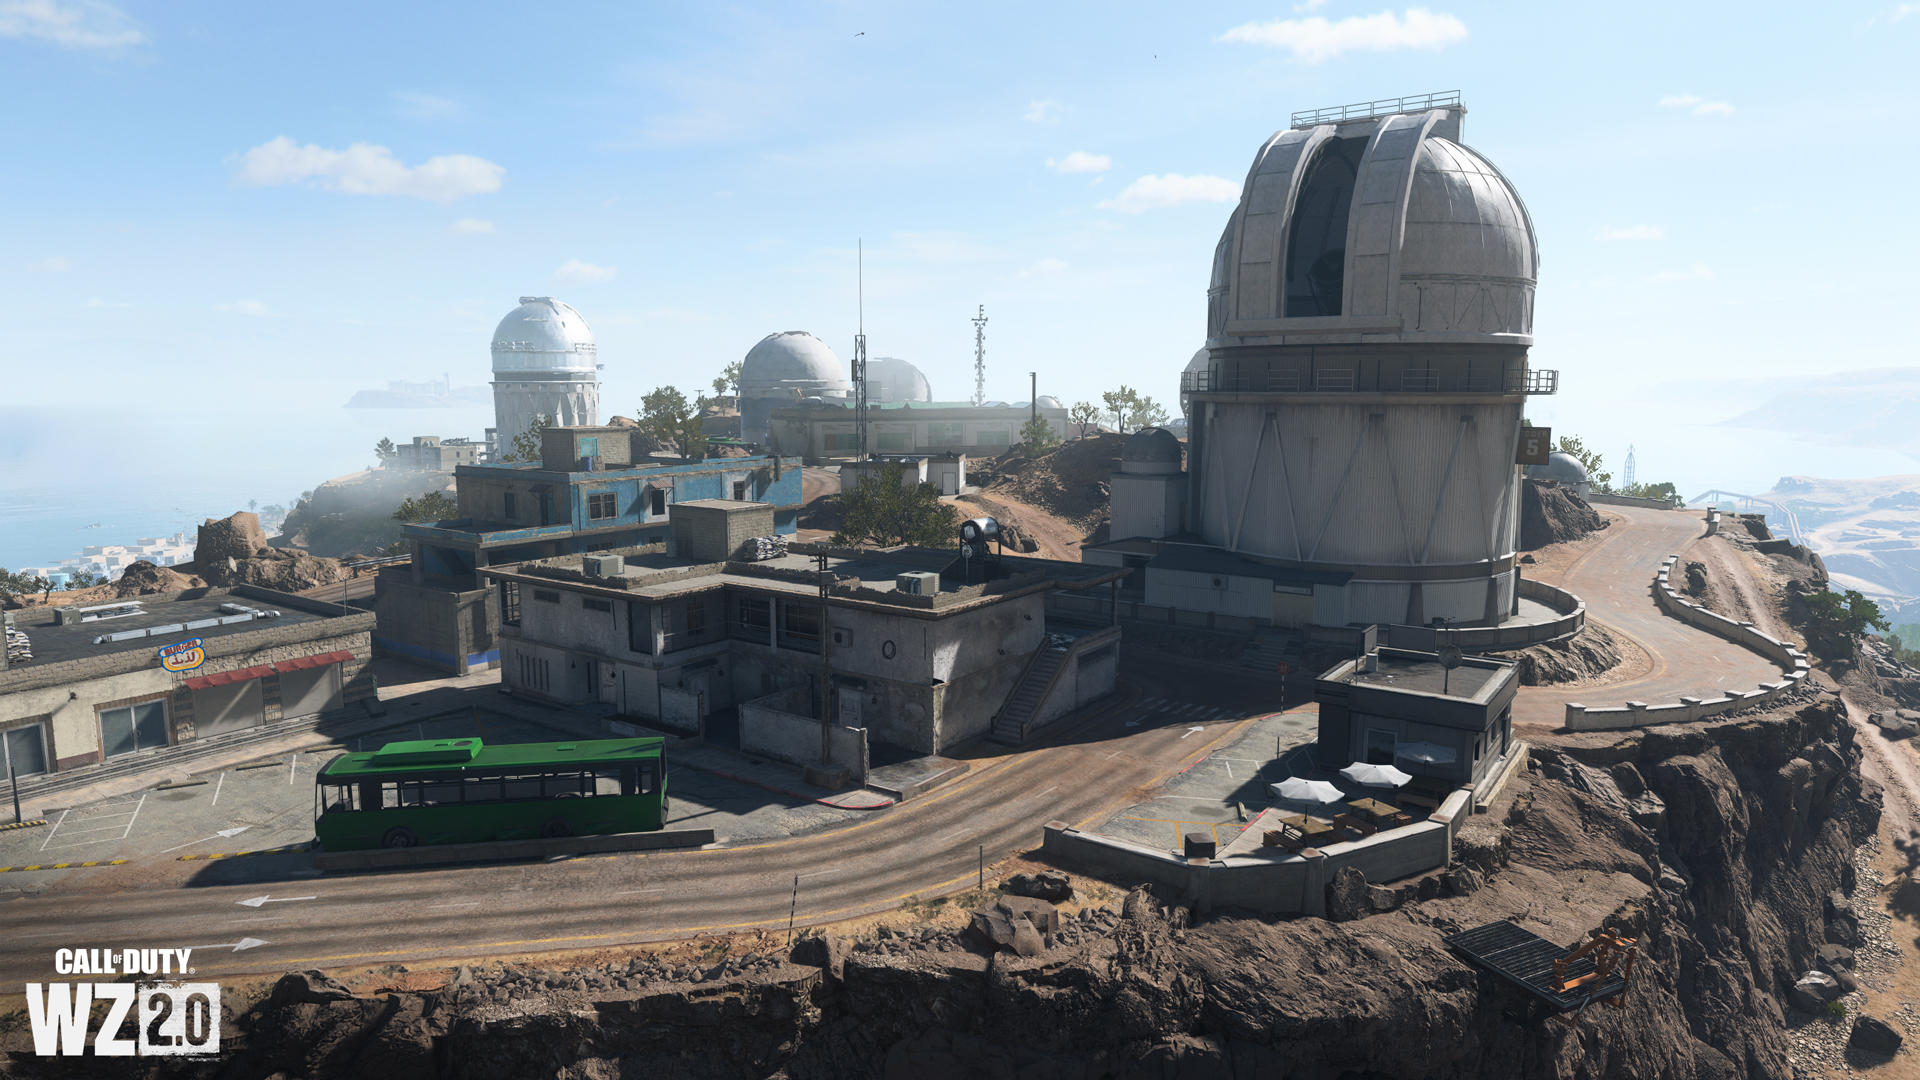 Call of Duty: Warzone 2.0 Al Mazrah map reveal